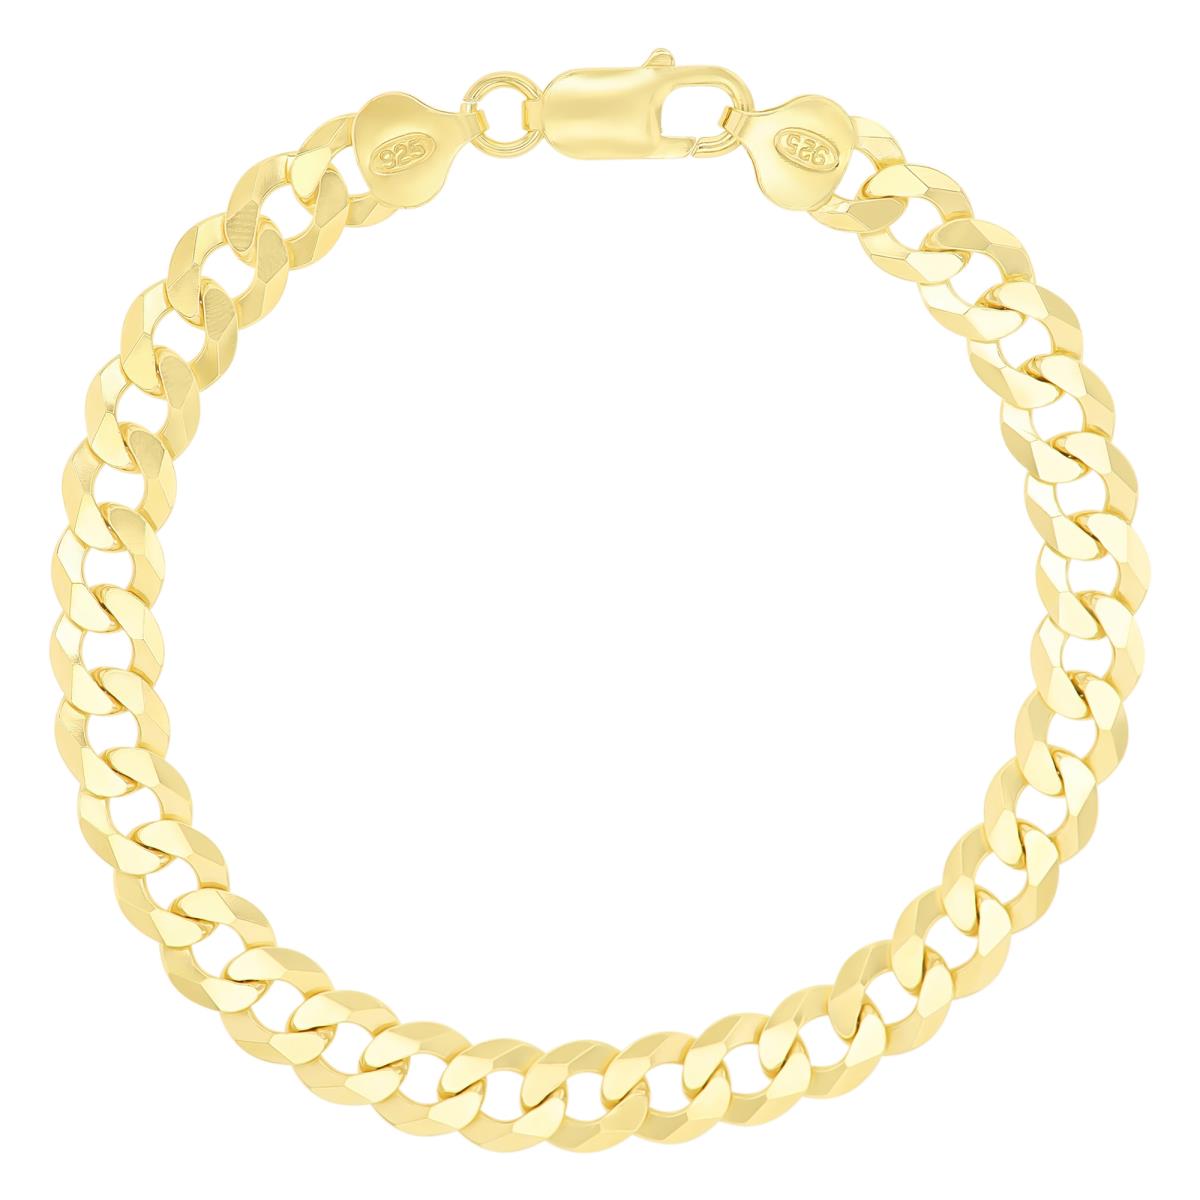 Sterling Silver Yellow 1 Micron 7.7mm 200 Flat Curb 8.5"Chain Bracelet